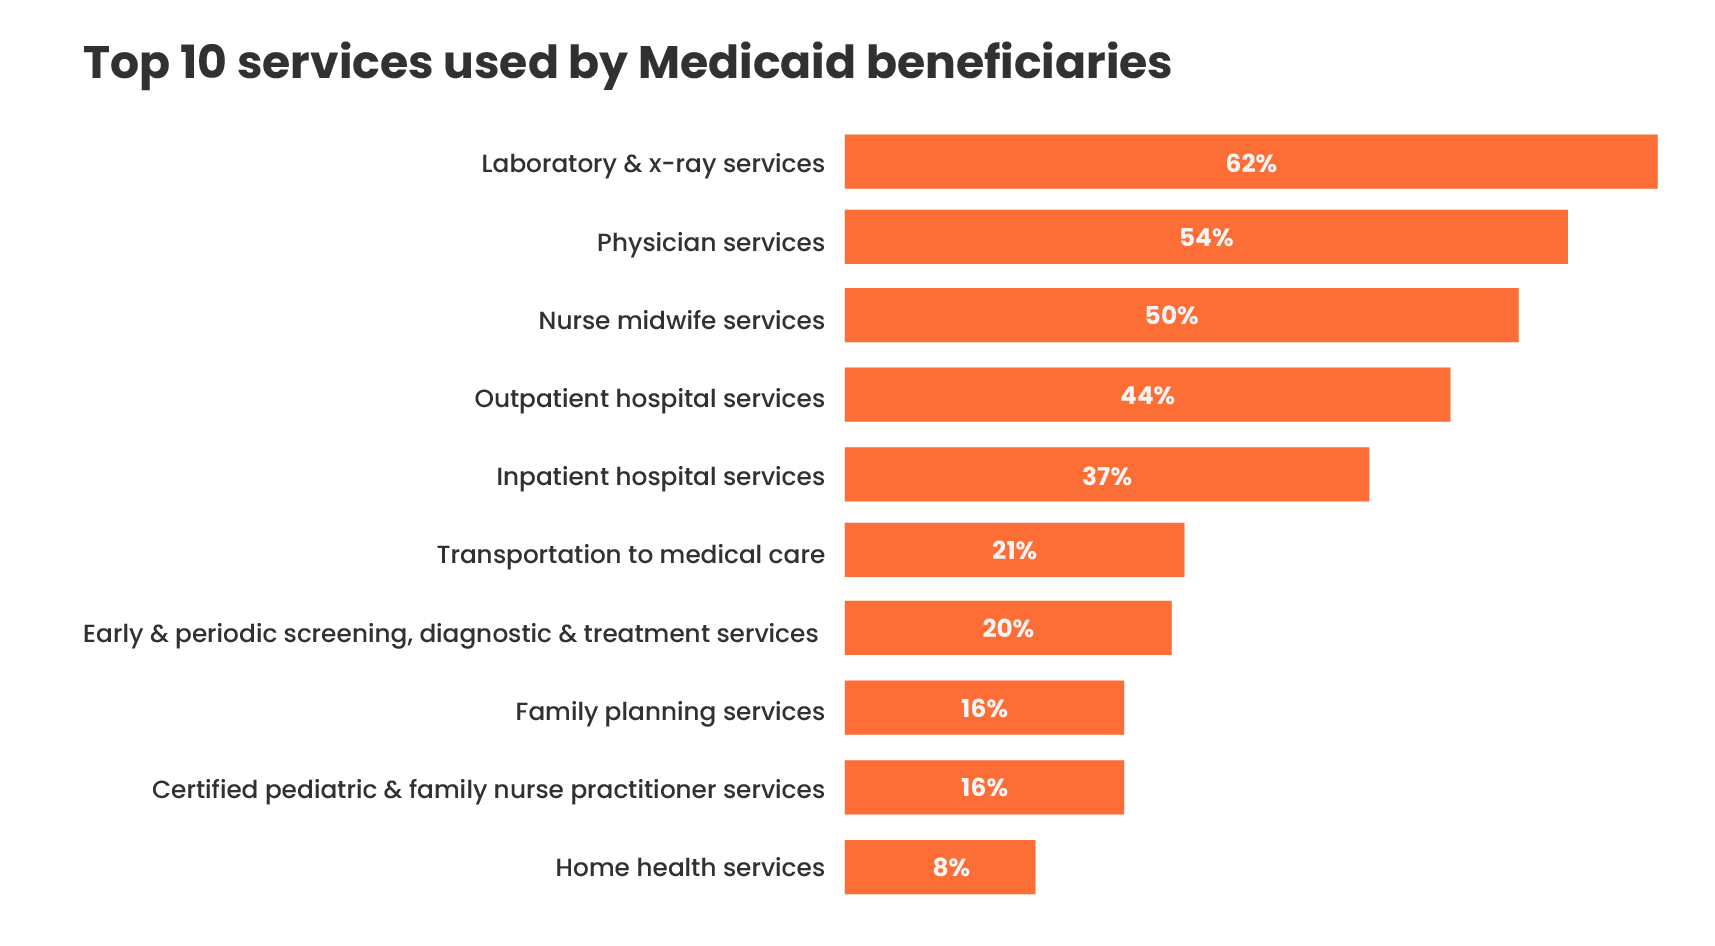 Top 10 services used by Medicaid beneficiaries:Laboratory and x-ray services 62% Physician services 54% Nurse midwife services 50% Outpatient hospital services 44% Inpatient hospital services 37% Transportation to medical care 21% Early and periodic screening, diagnostic, and treatment services 20% Family planning services 16% Certified pediatric and family nurse practitioner services 16% Home health services 8% 